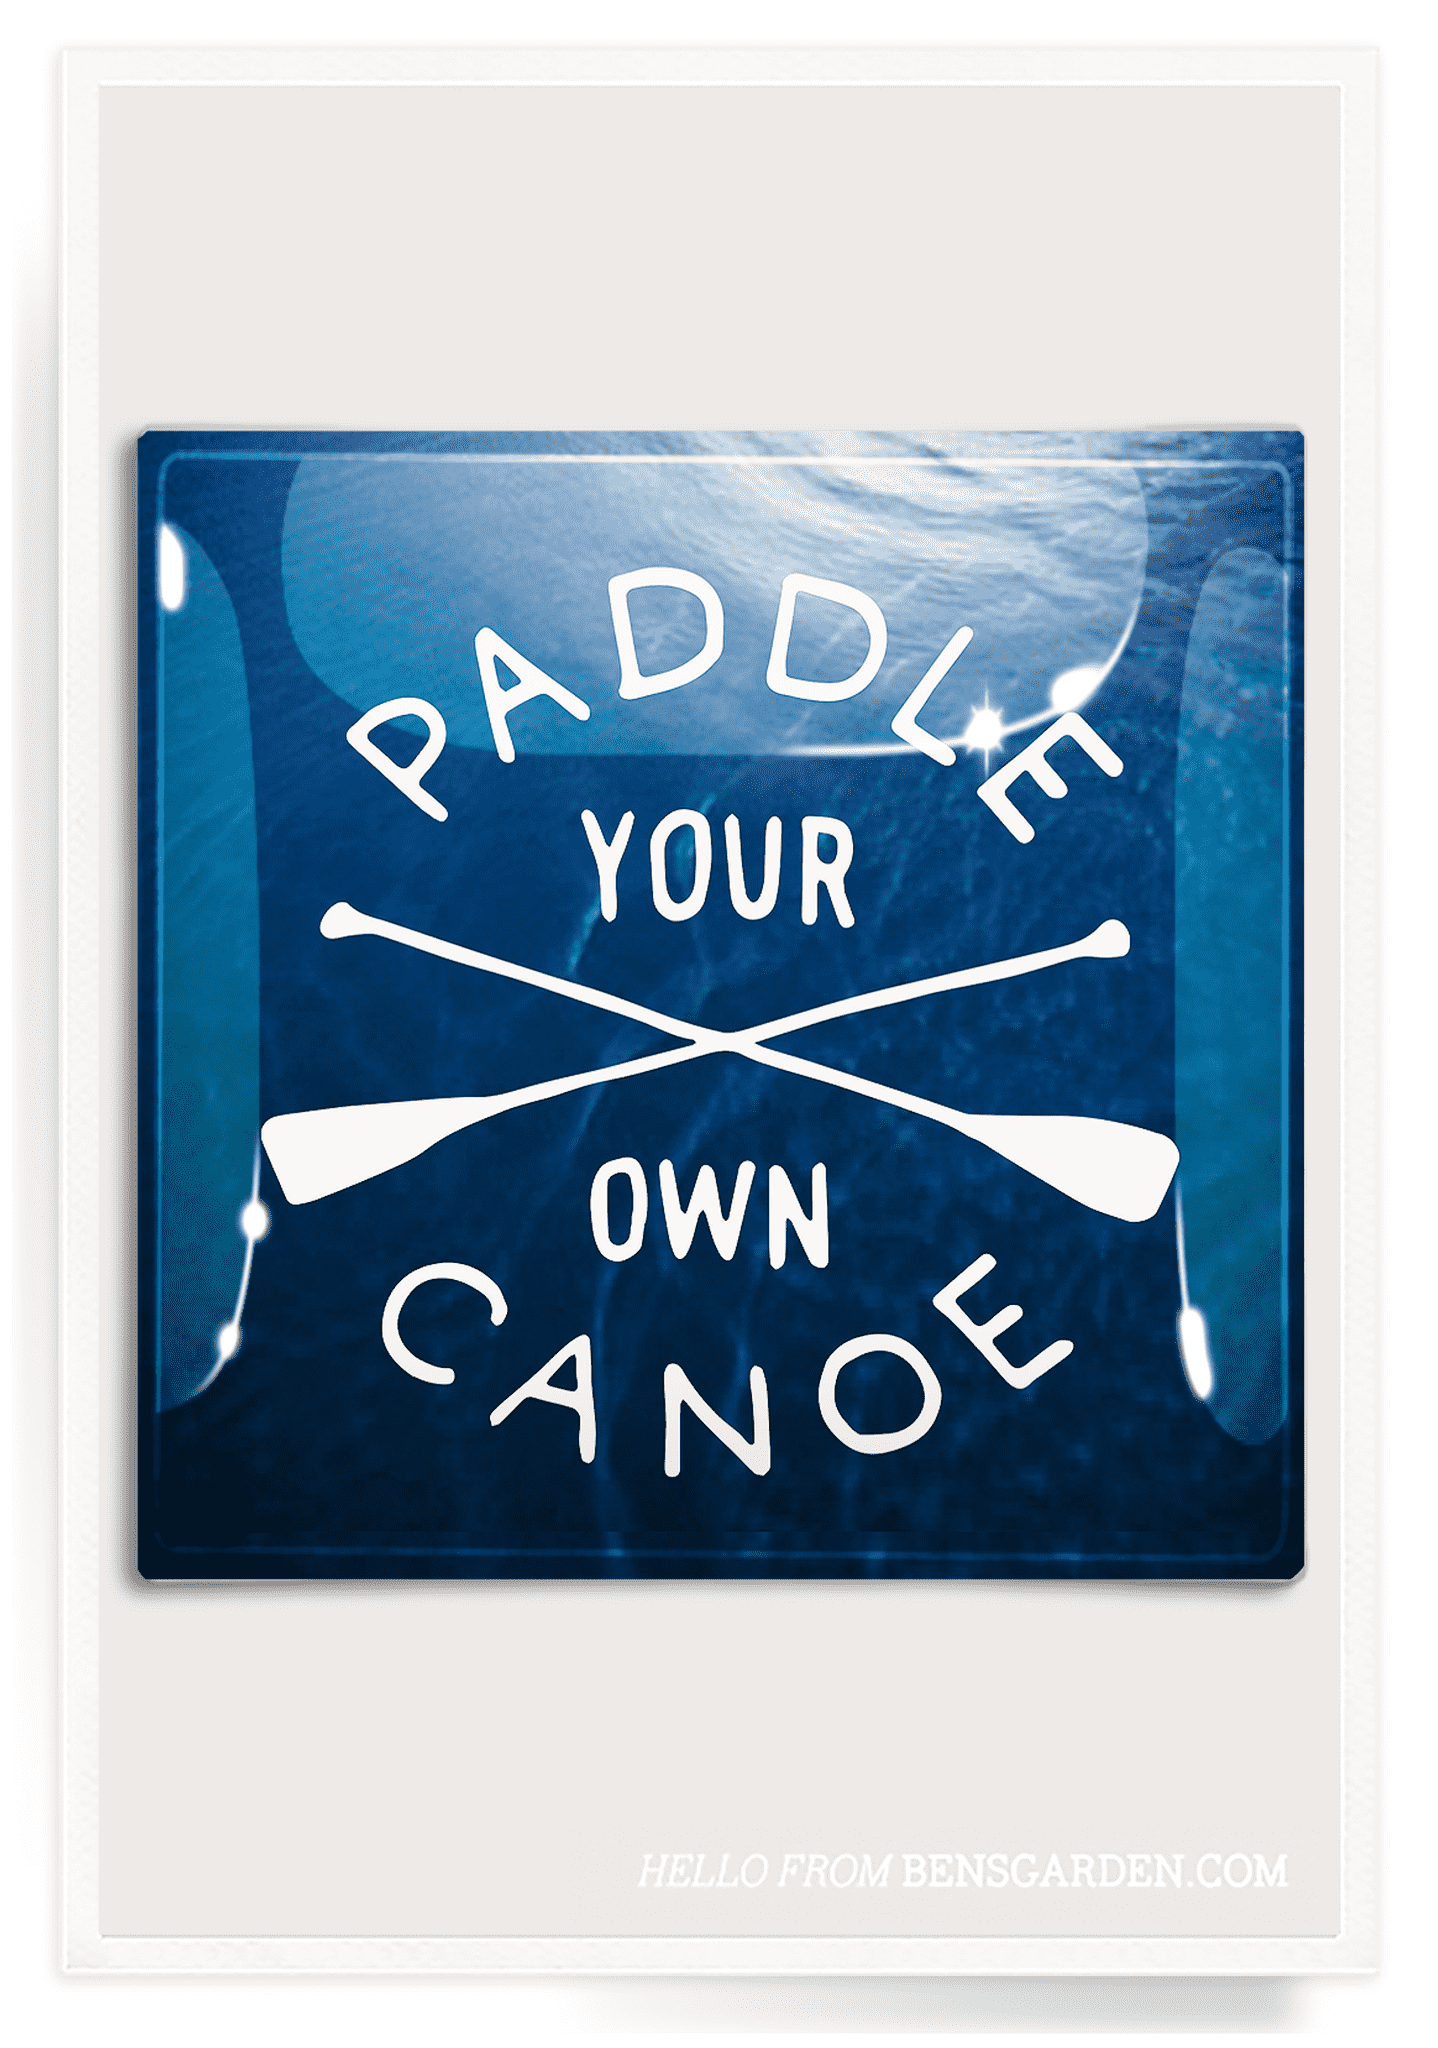 Paddle Your Own Canoe Decoupage Glass Tray - Bensgarden.com